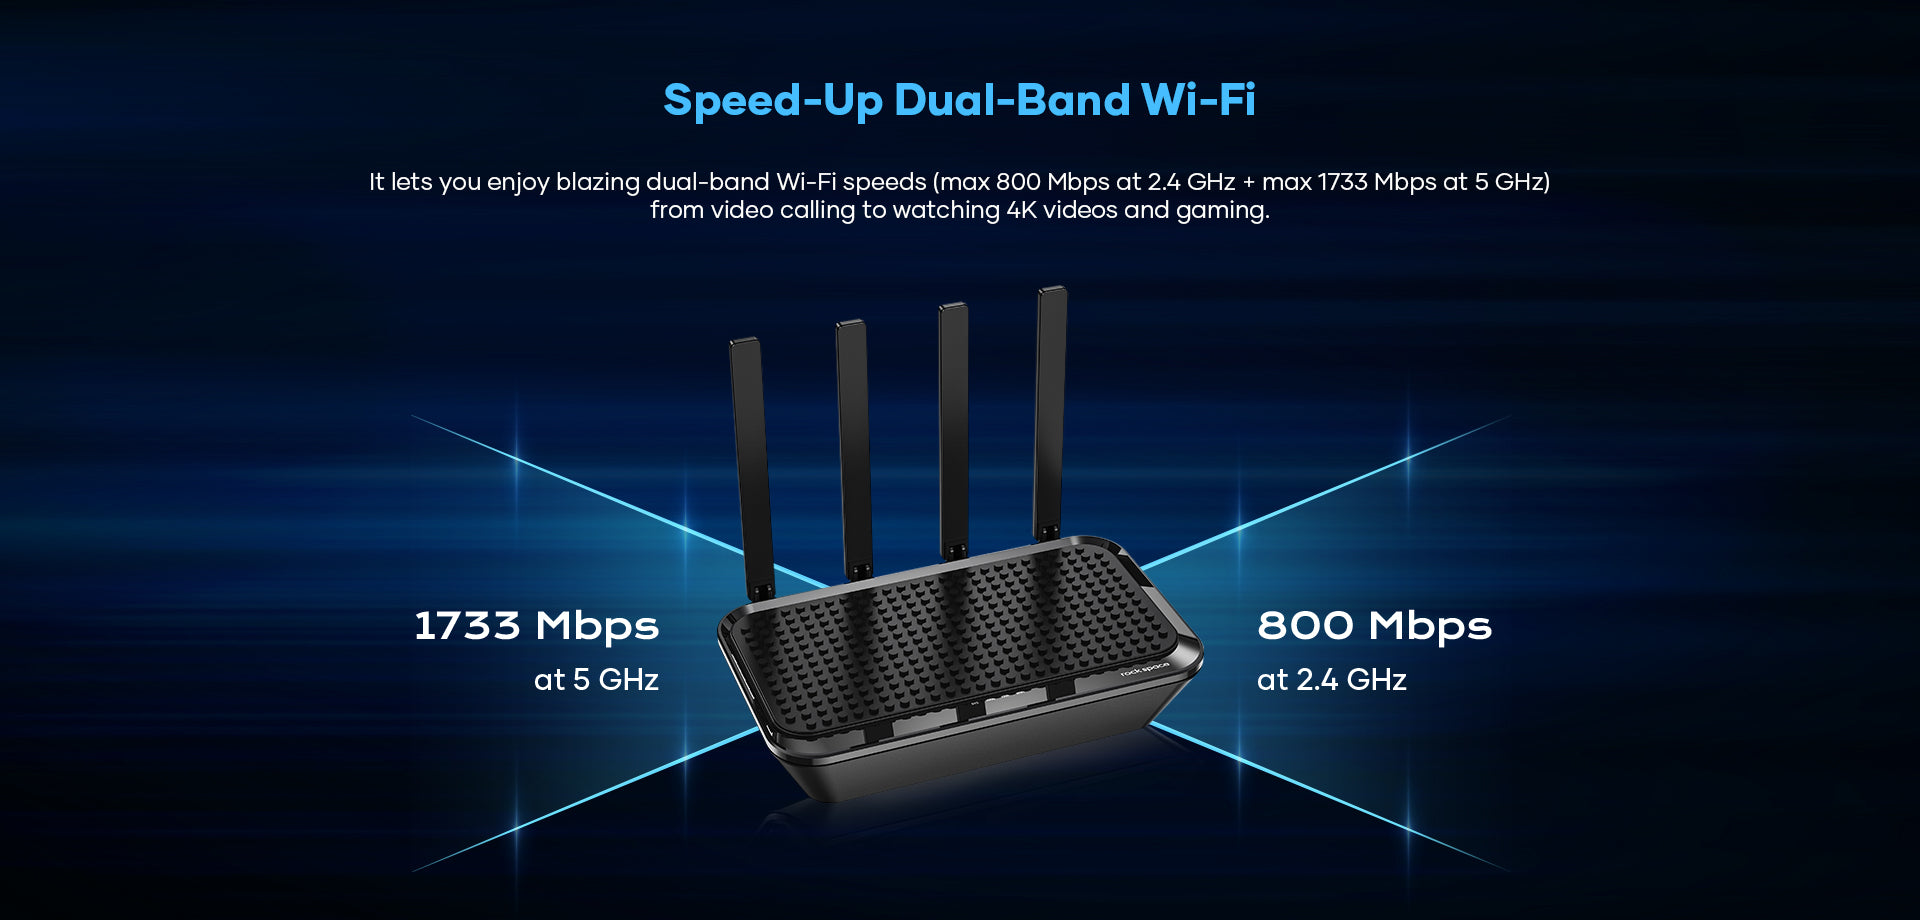 Wi-Fi speeds of 800 Mbps at 2.4 GHz and 1733 Mbps at 5 GHz